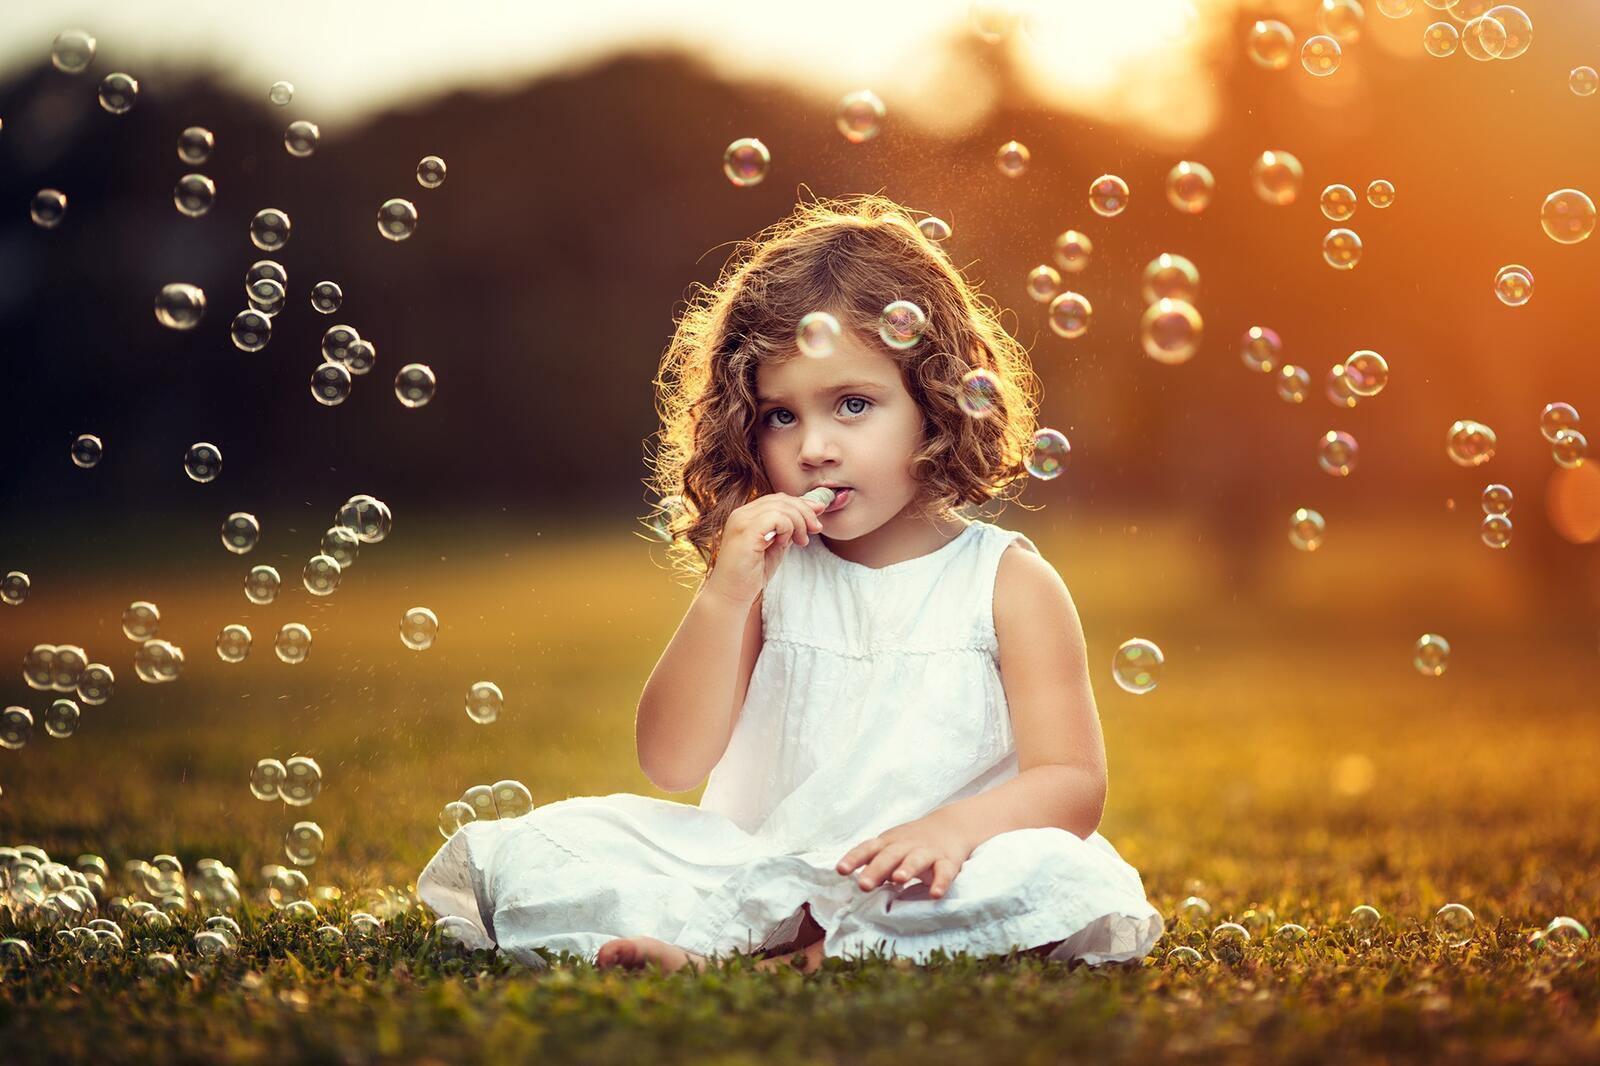 Free photo A little girl in a white dress blowing soap bubbles